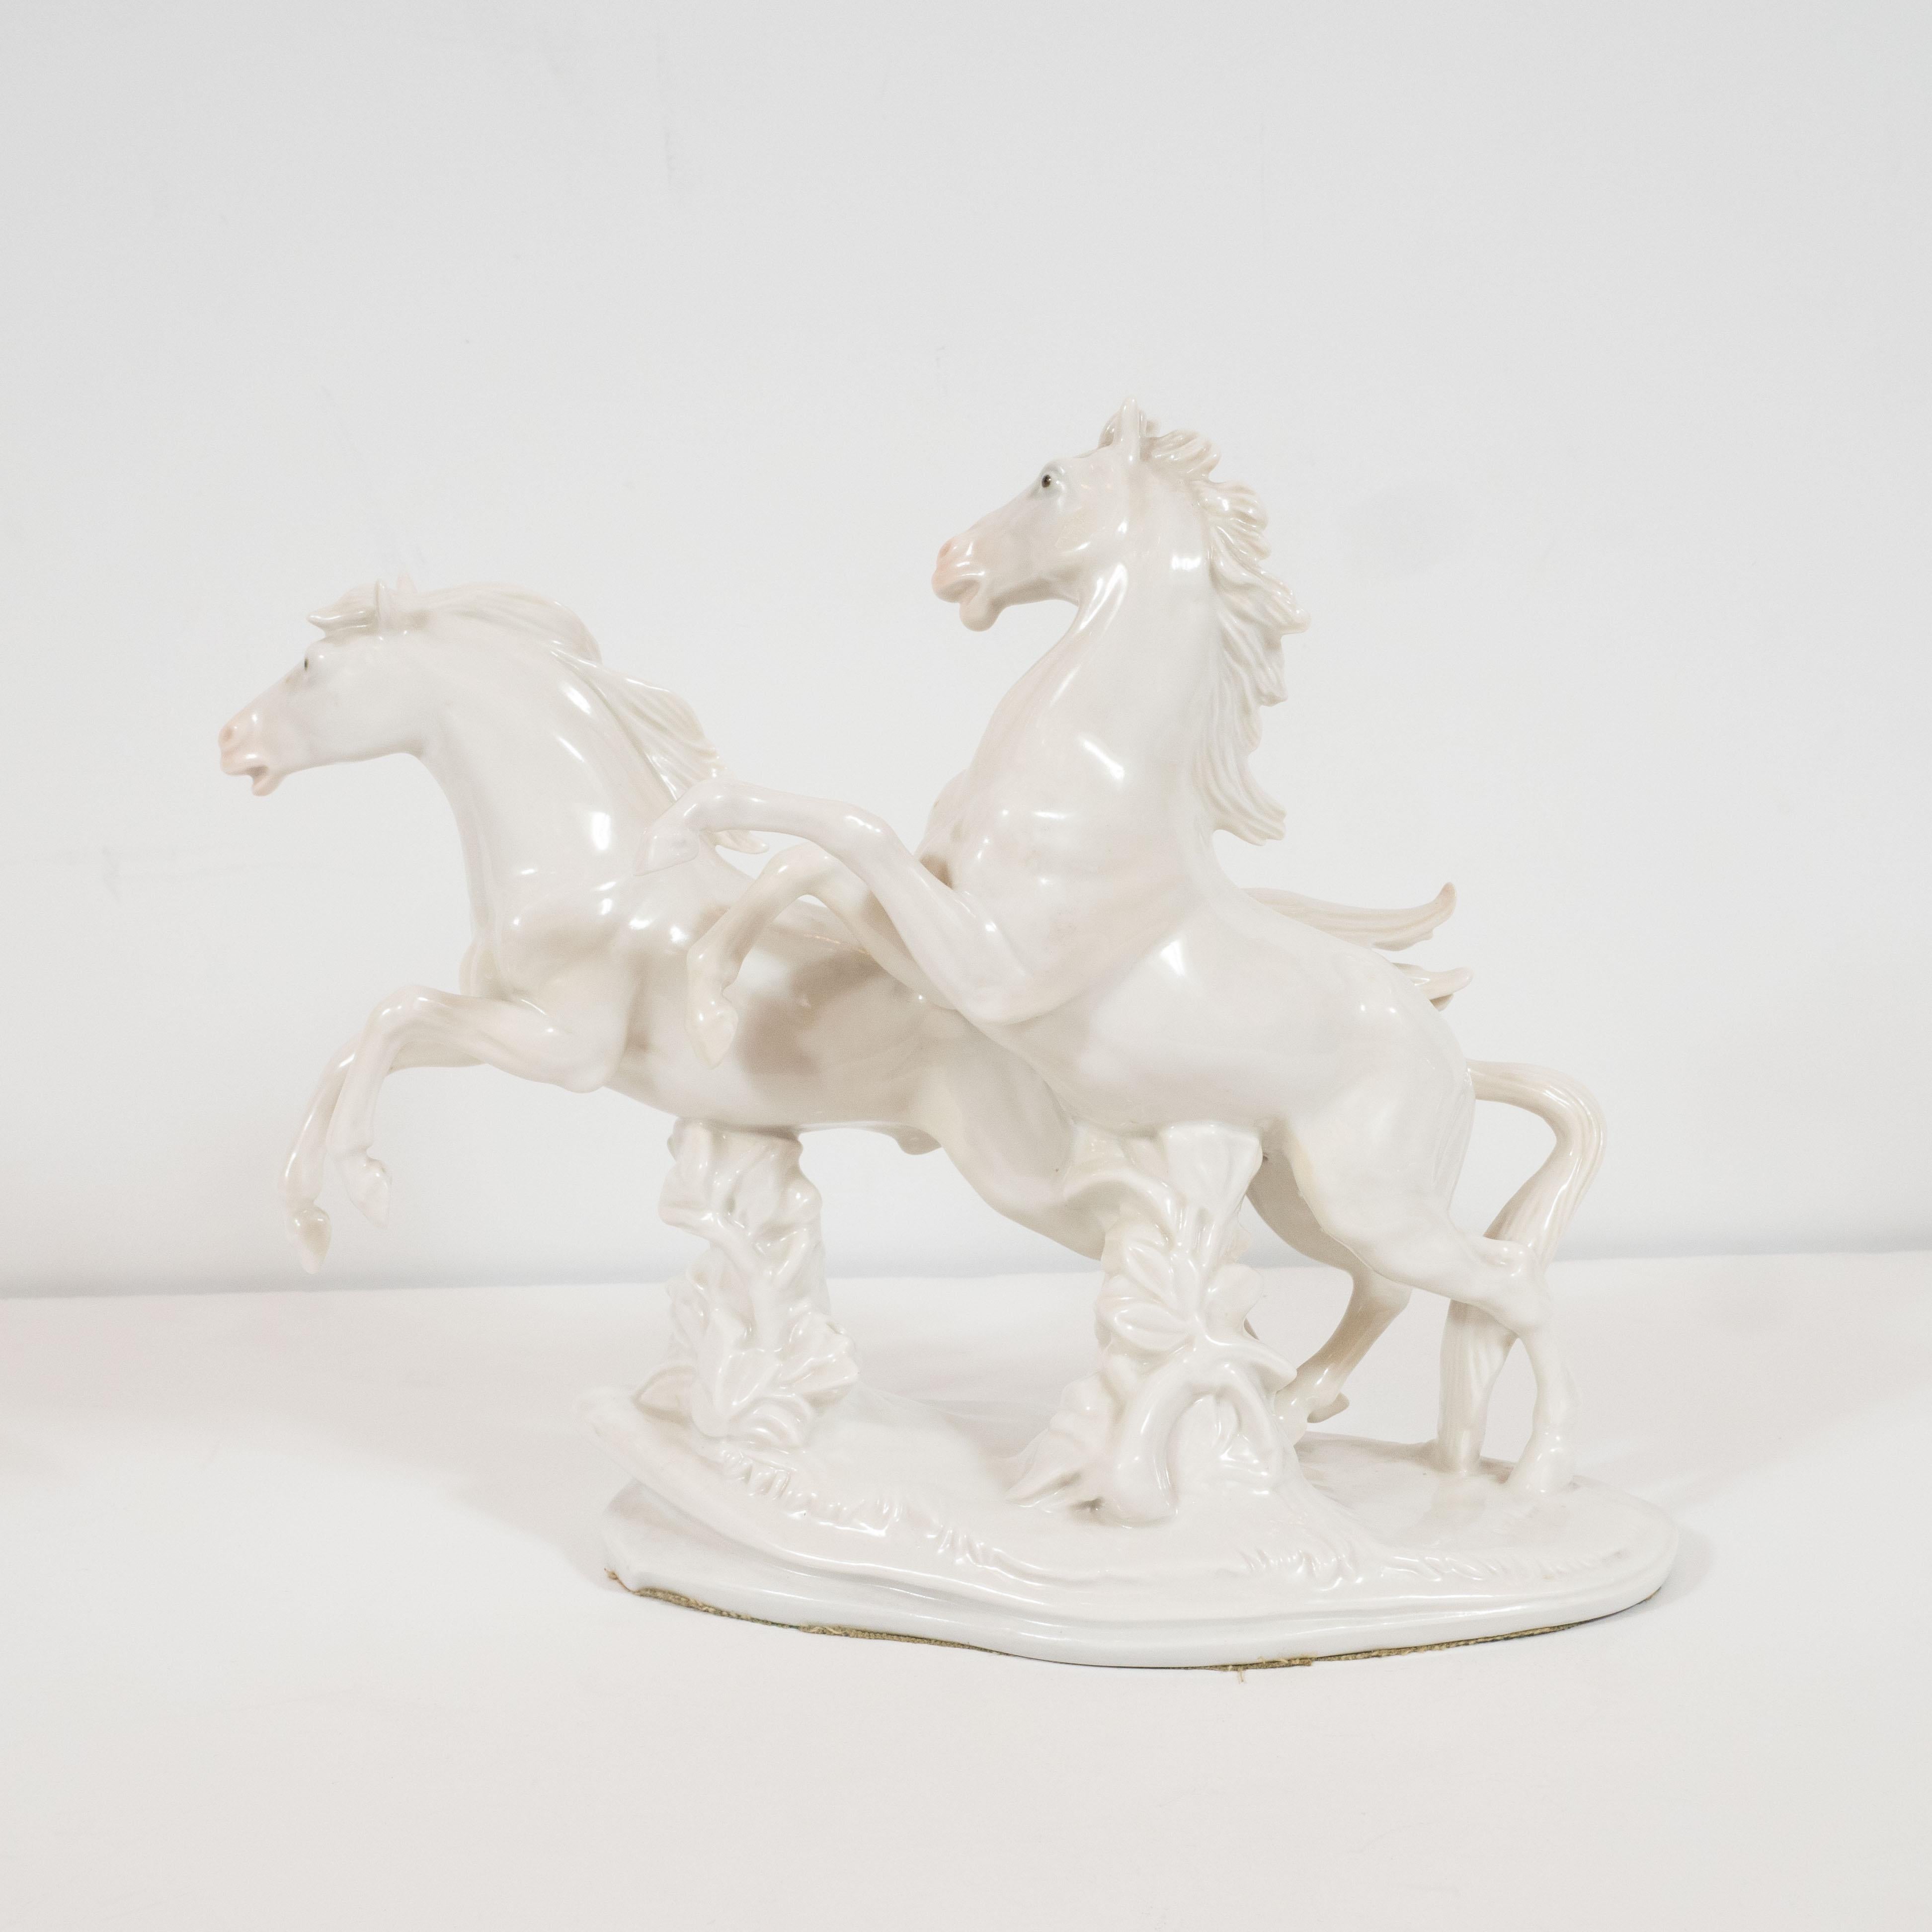 Art Deco White Porcelain Galloping Horse Sculptures Signed by Karl Ens For Sale 1